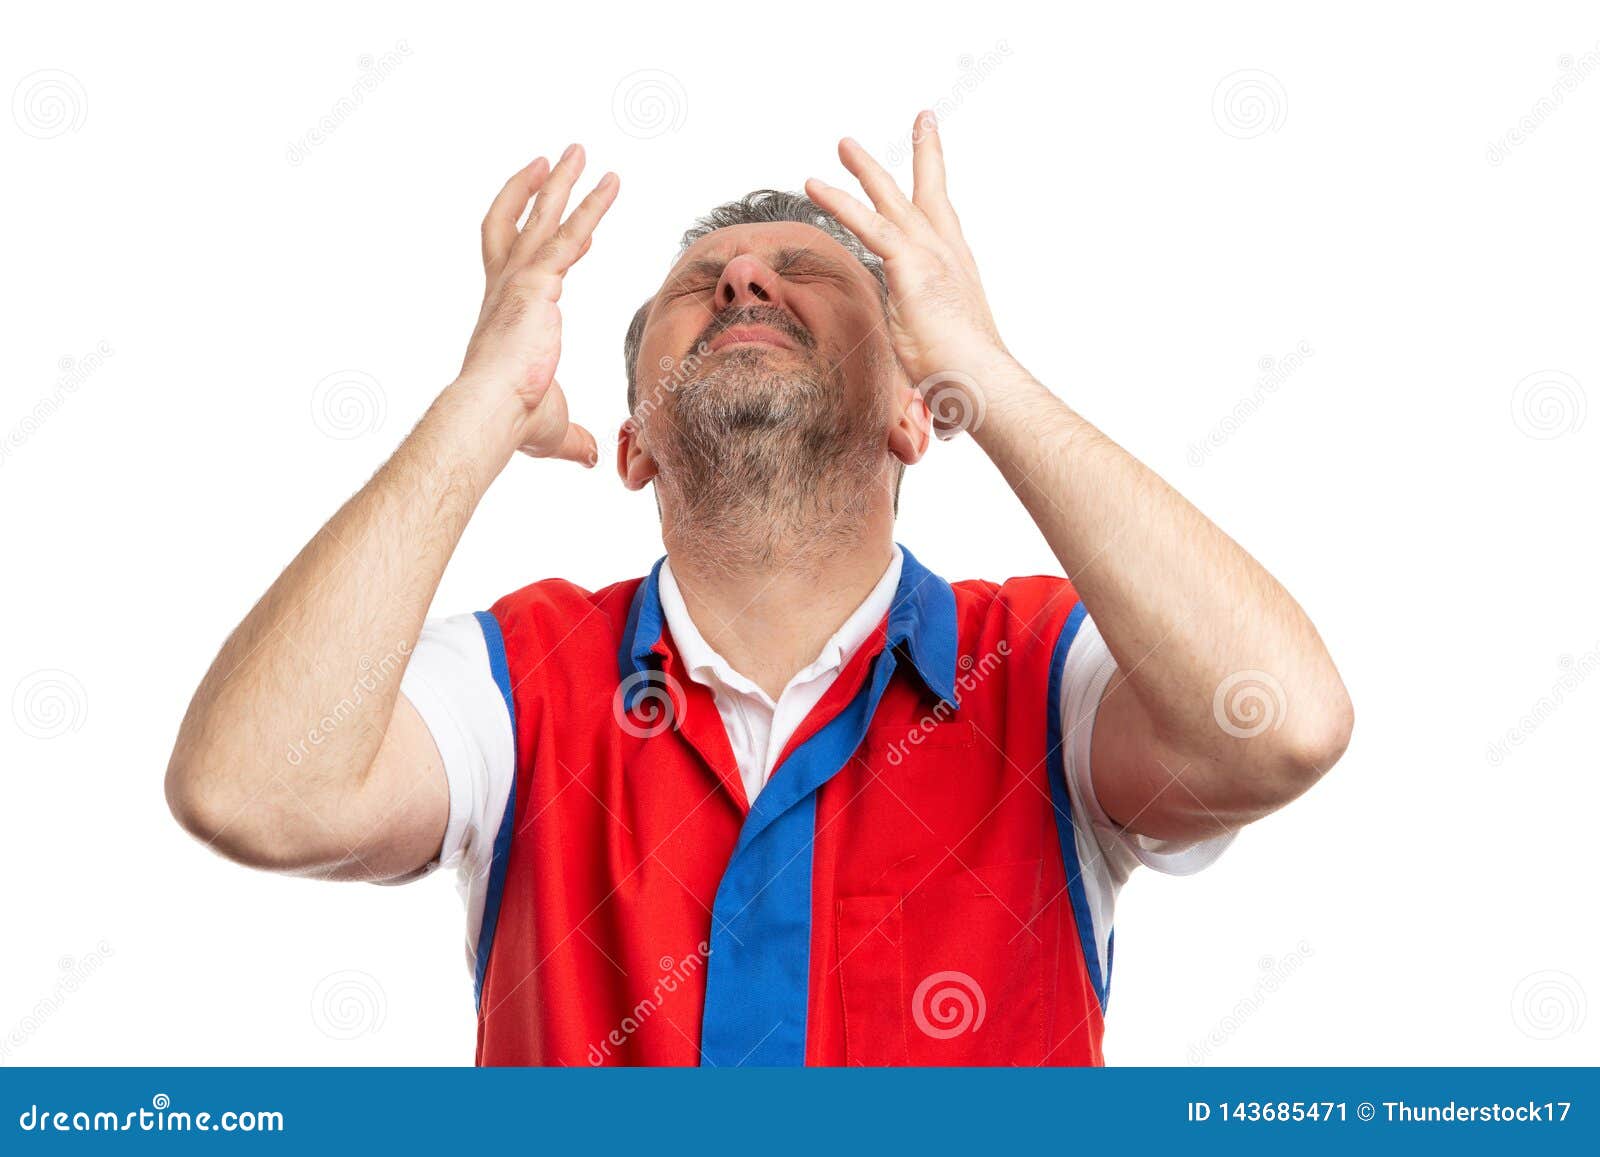 Hypermarket Worker With Headache Making Despaired Expression Stock Image Image Of Profession Despair